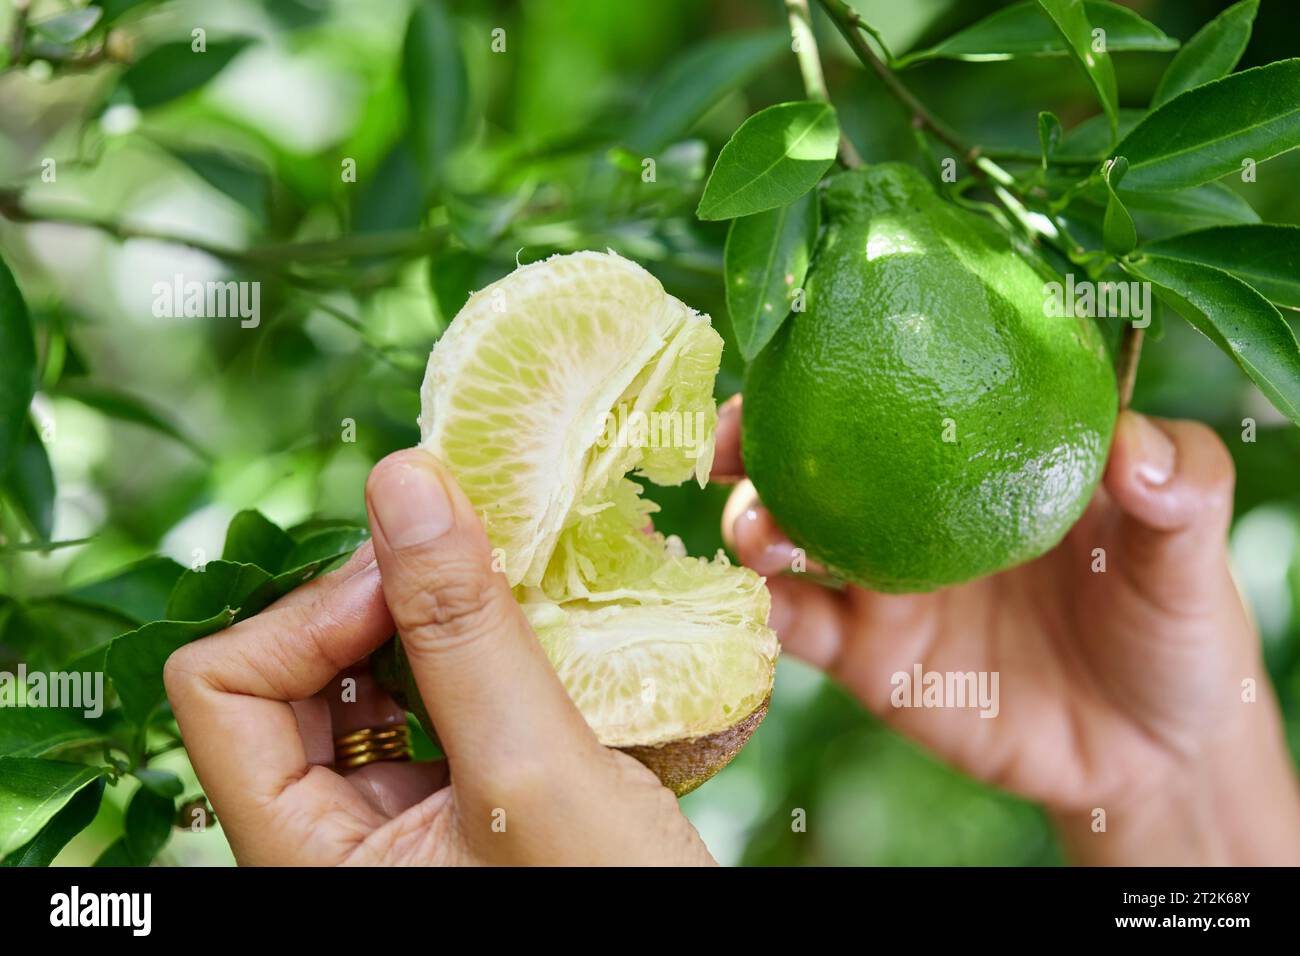 Close-up of hand holding Citrus reticulata Blanco fruit on tree Stock Photo